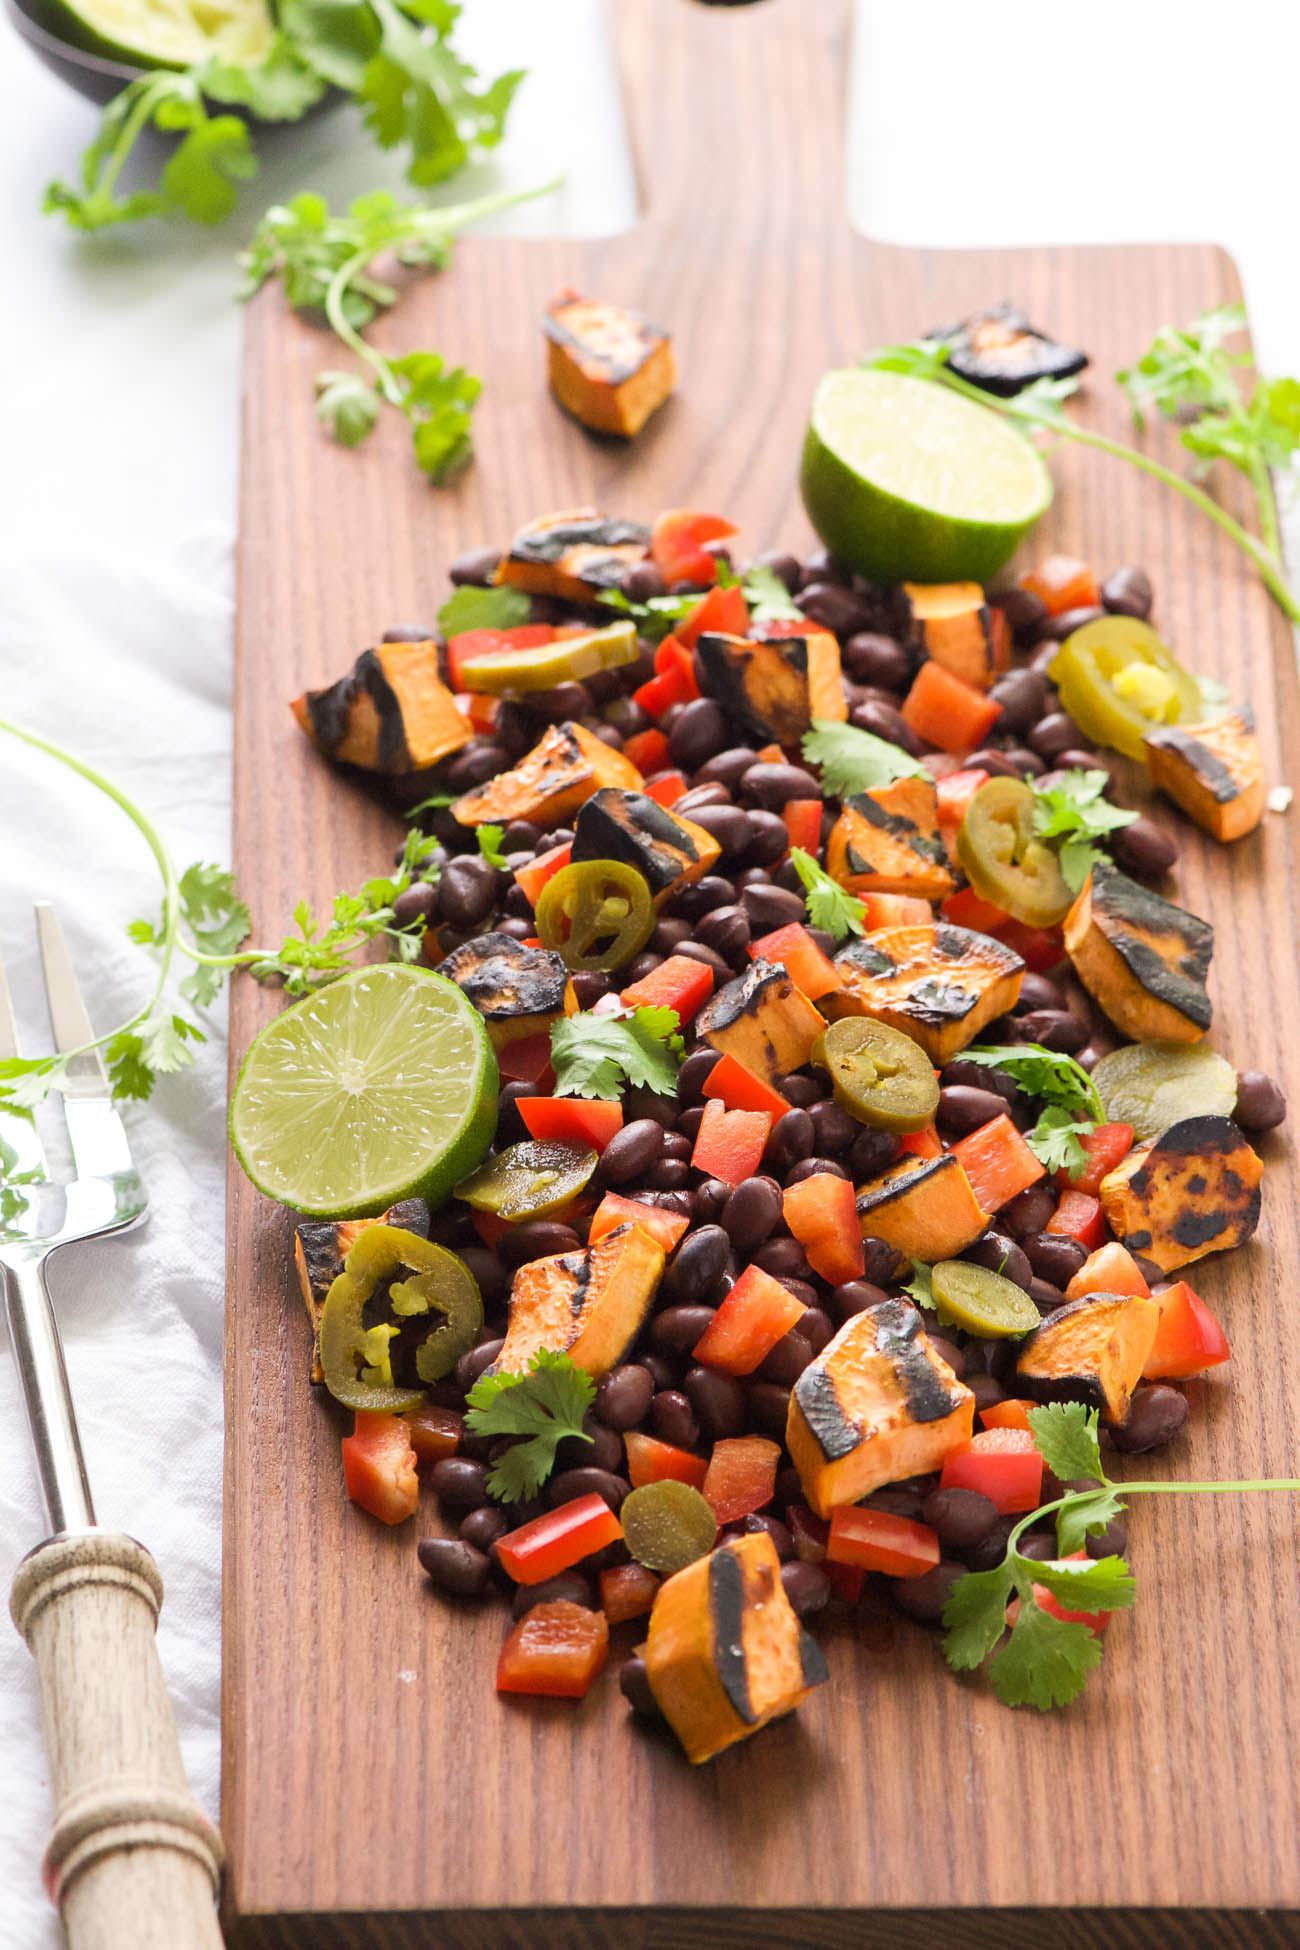 Take your dinner outside with this Southwestern Grilled Sweet Potato Salad! Sweet potatoes caramelize on the grill and then mixed with black beans, charred corn, jalapenos, red pepper, onion and dressed with lime and cilantro. Try it hot off the grill or chilled - can't go wrong either way!